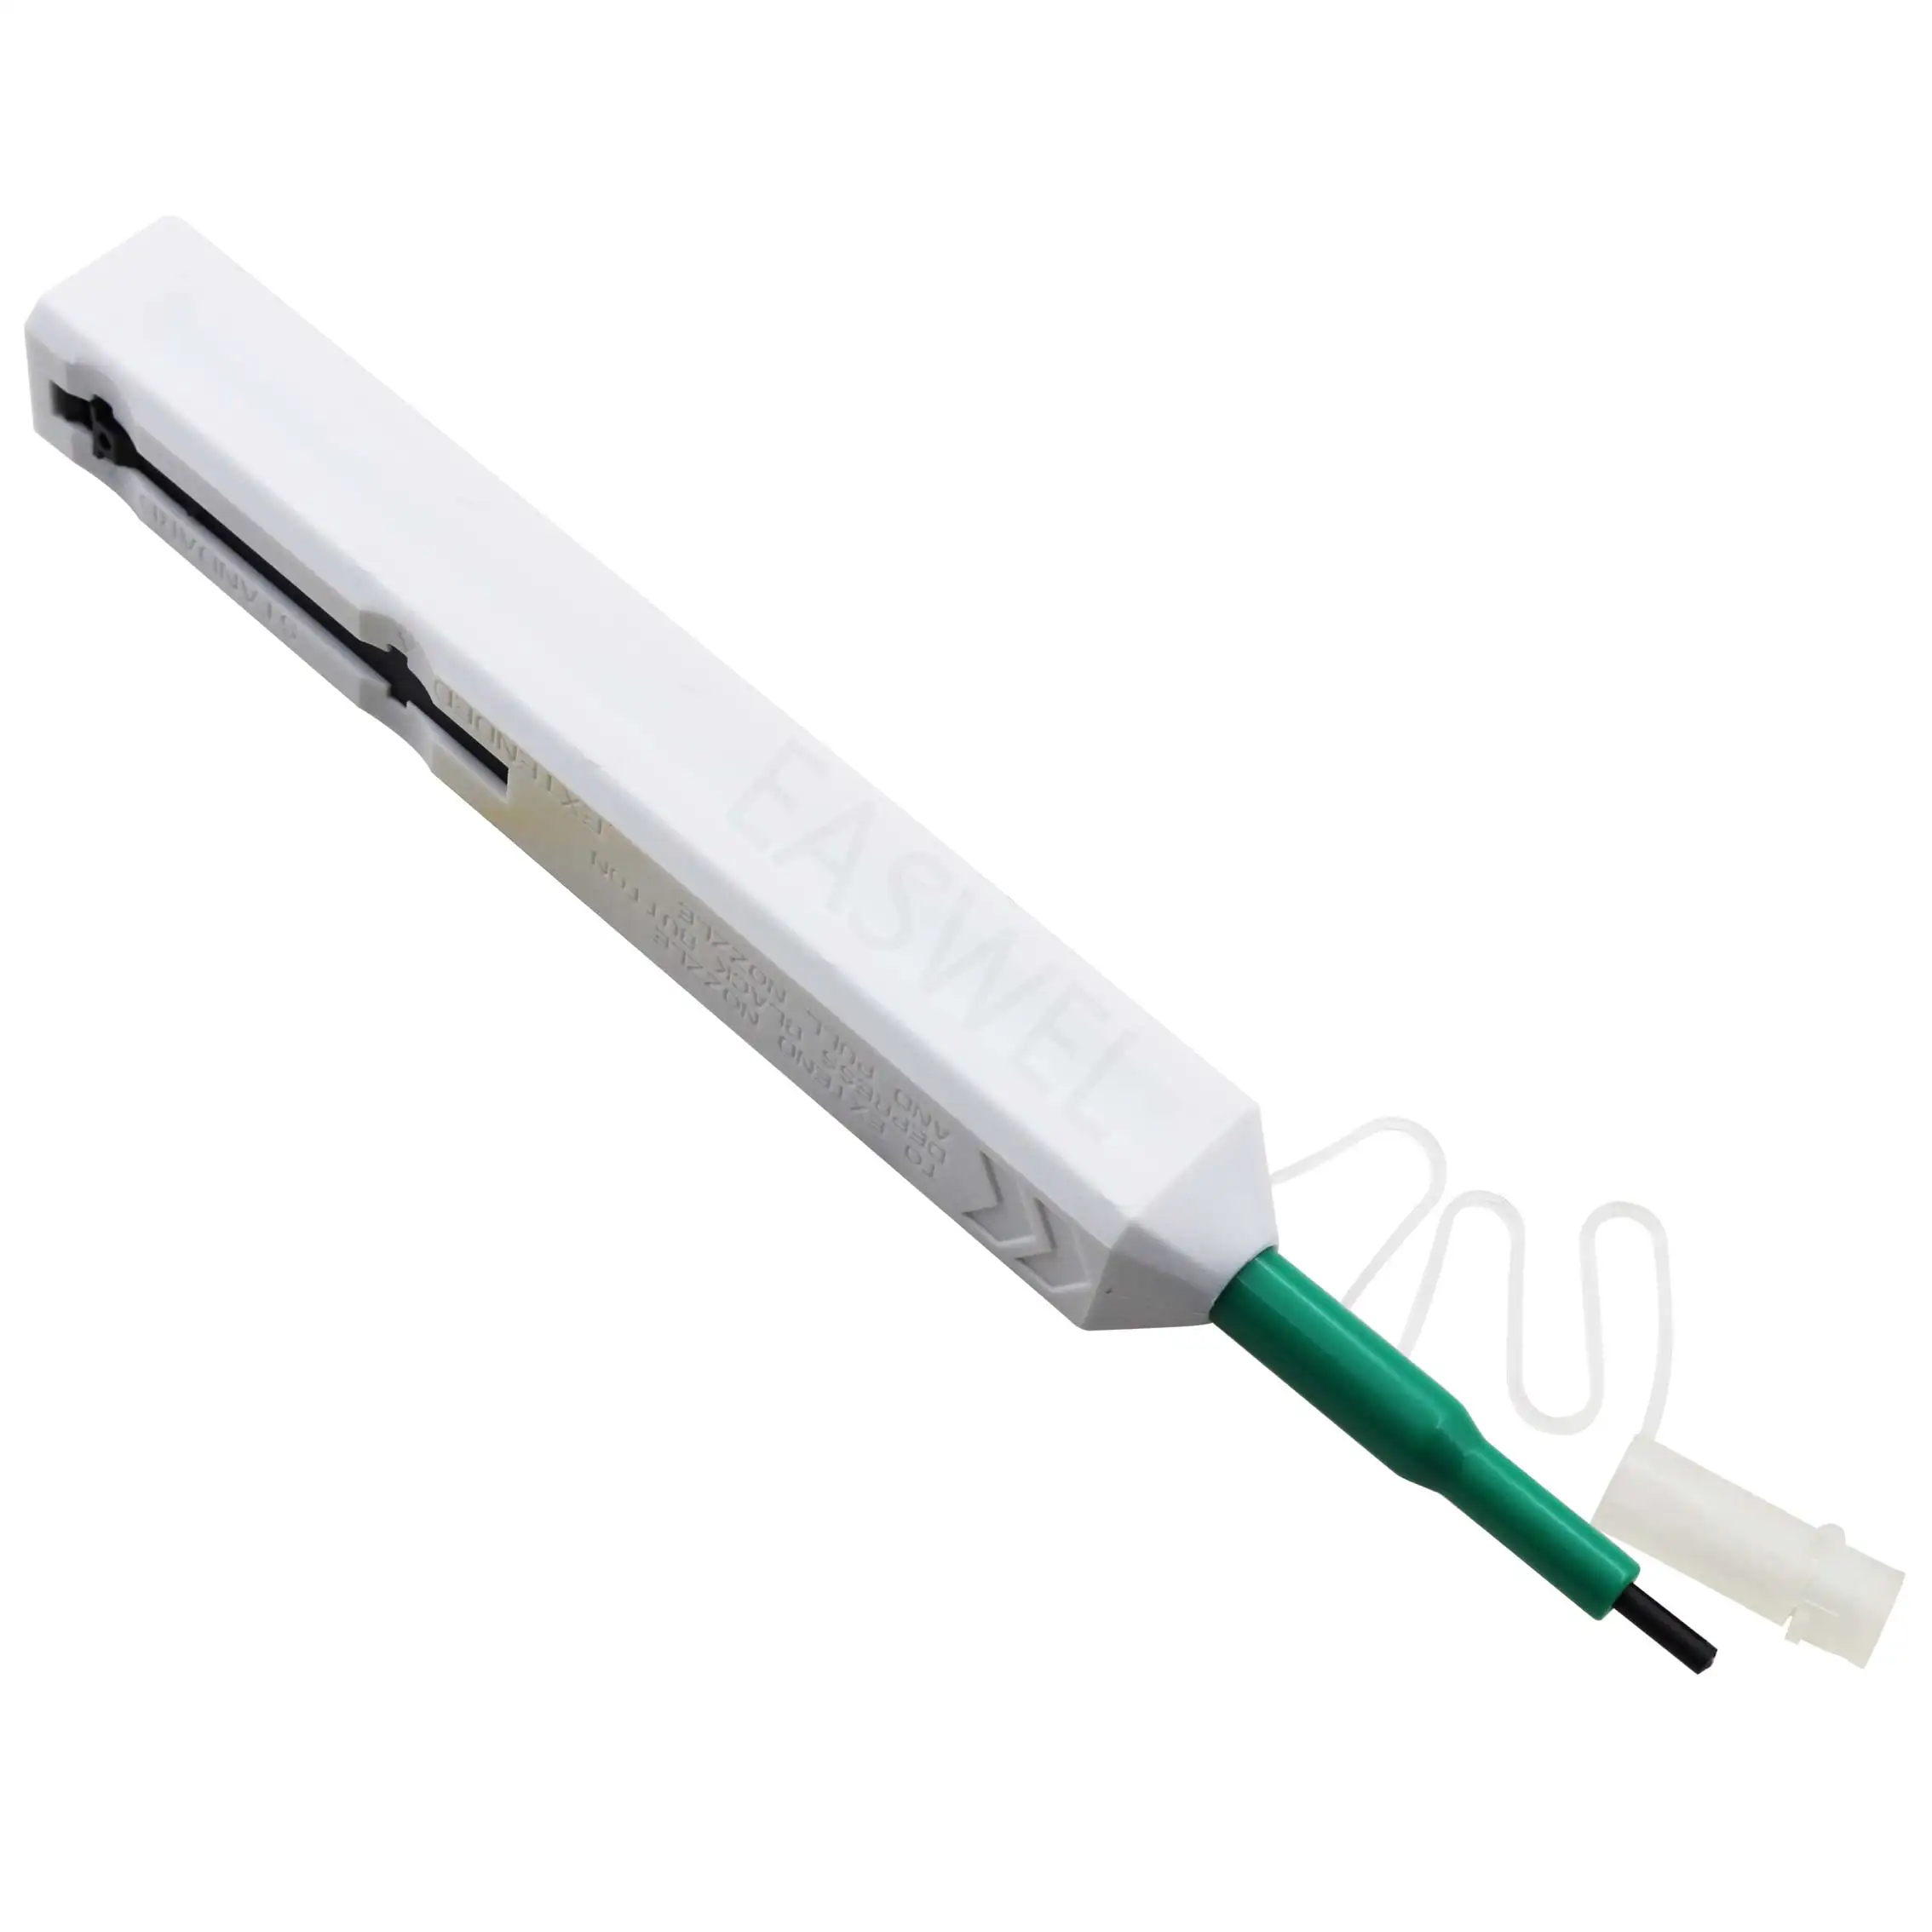 New One-Click cleaner fiber optic cleaning pen for 2.5mm FC/SC/ST connectors